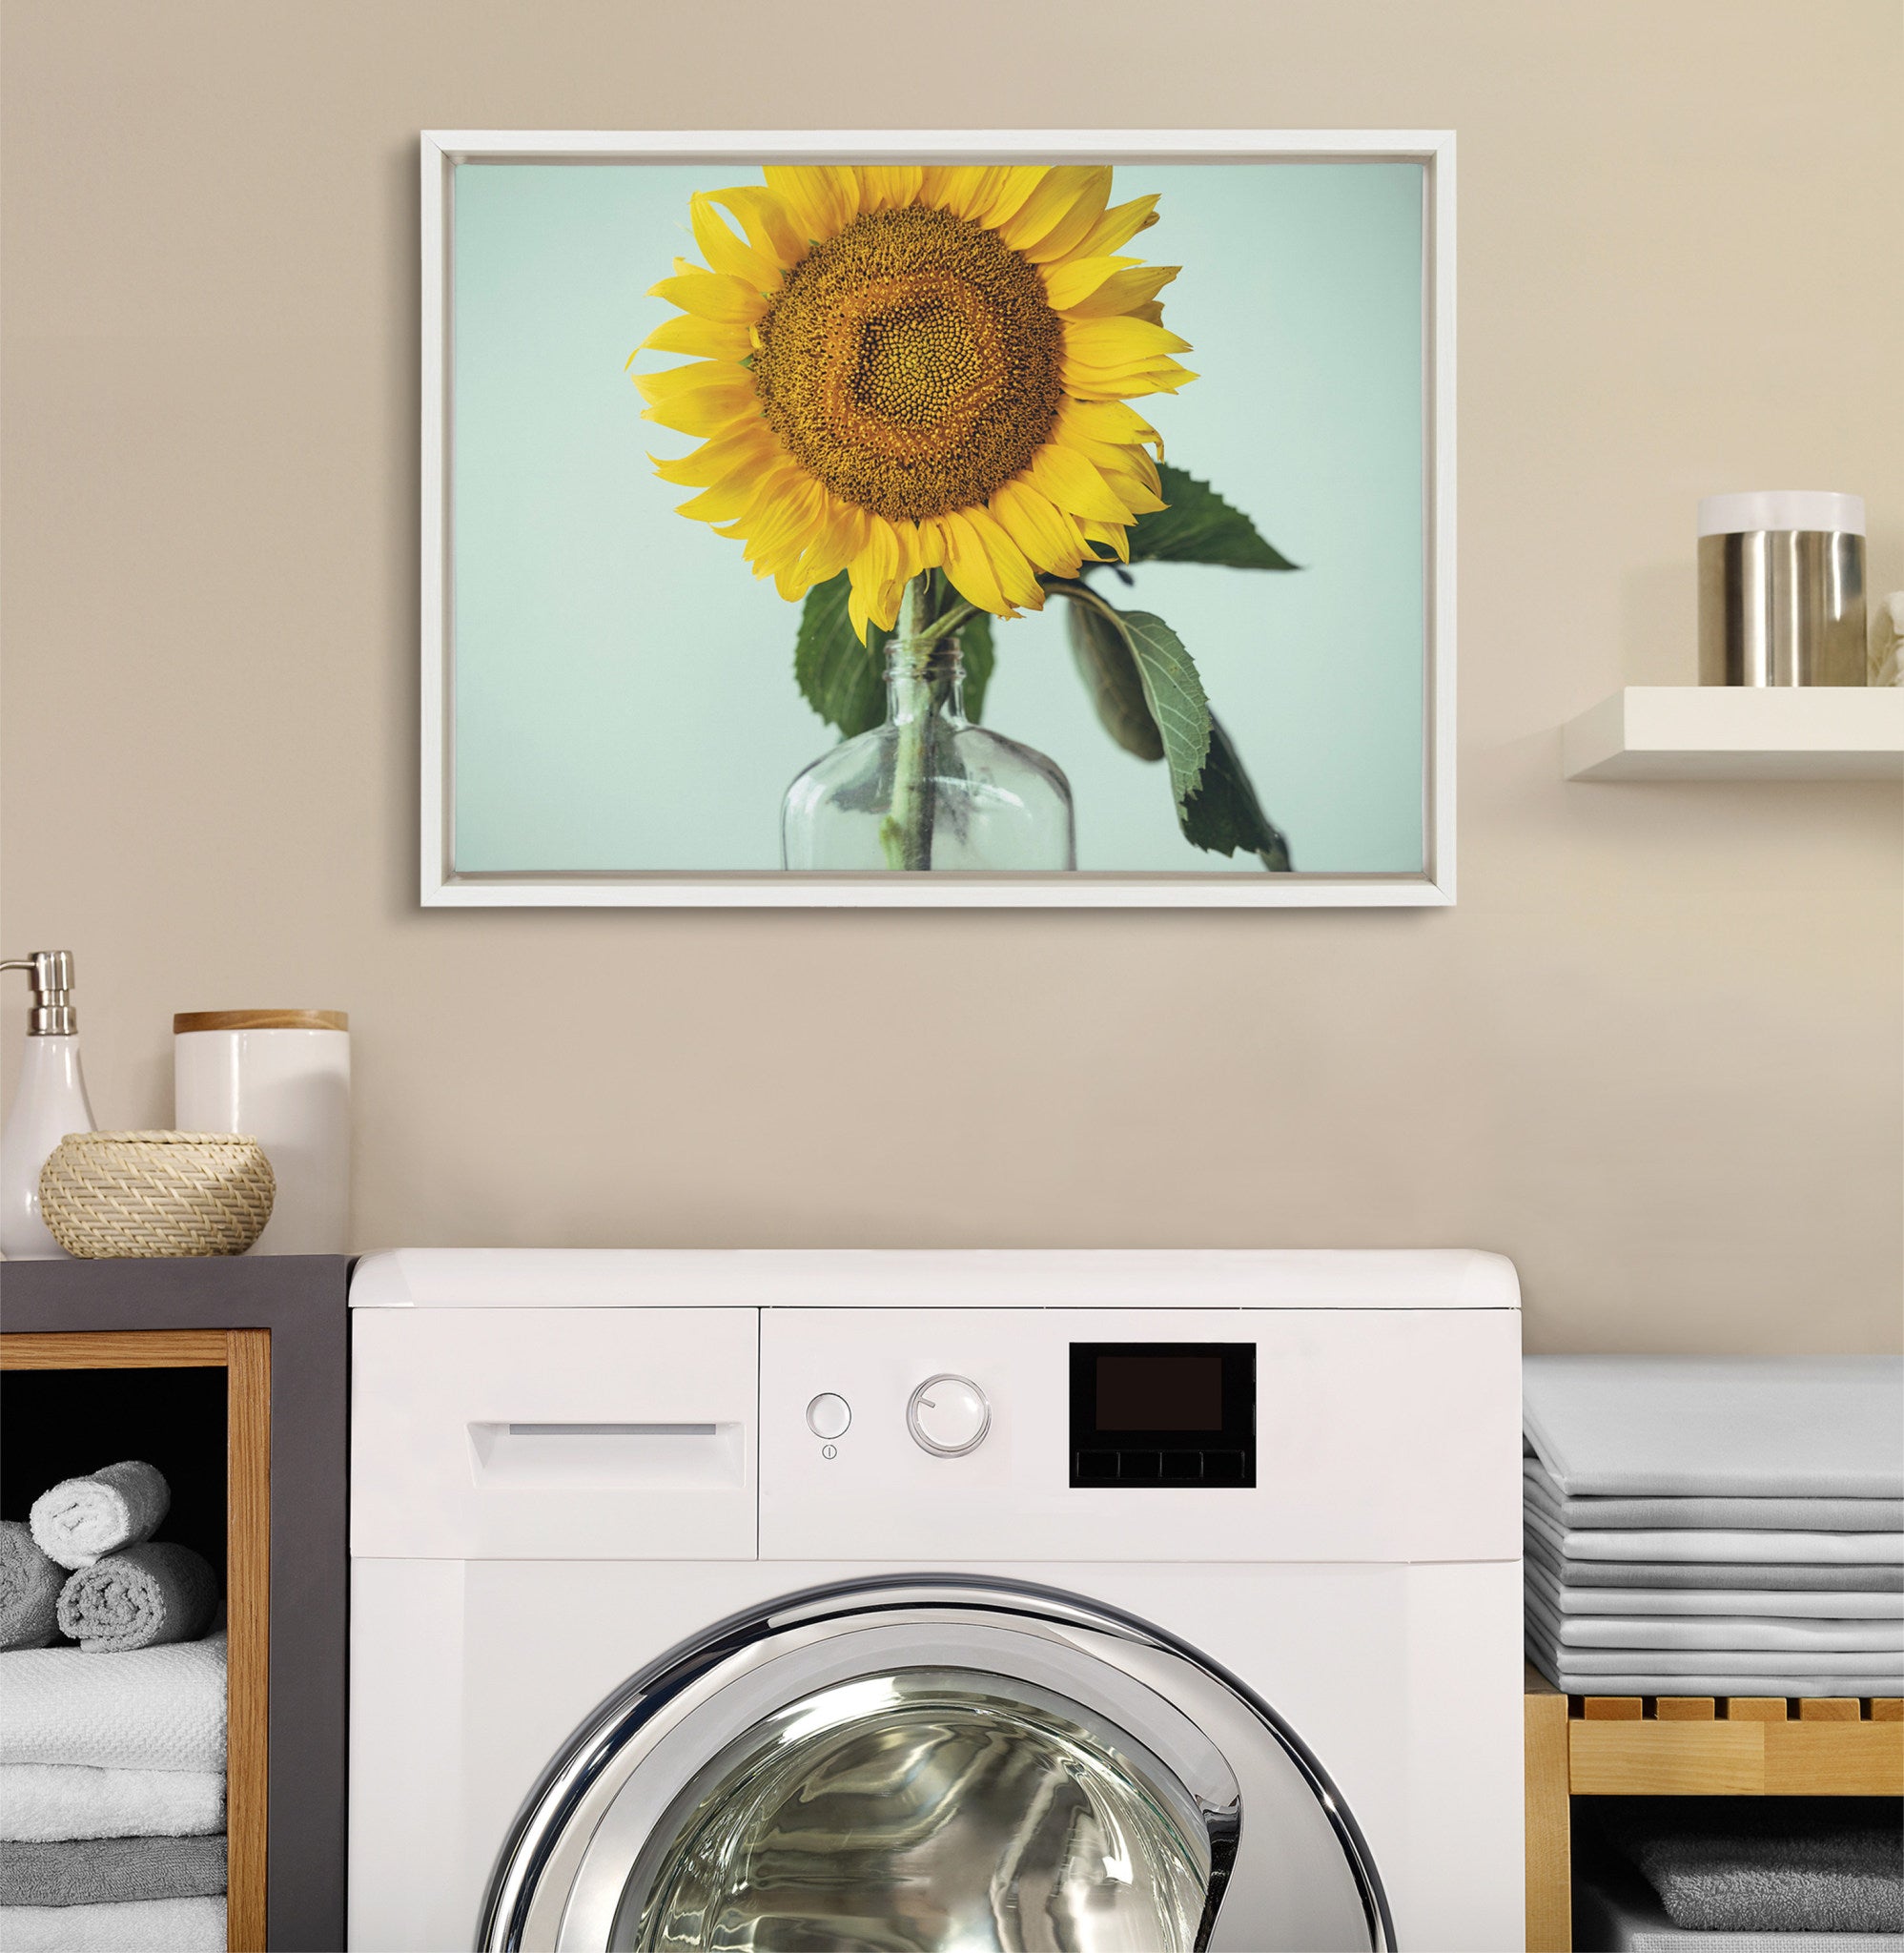 Sylvie Solo Sunflower Framed Canvas by Emiko and Mark Franzen of F2Images